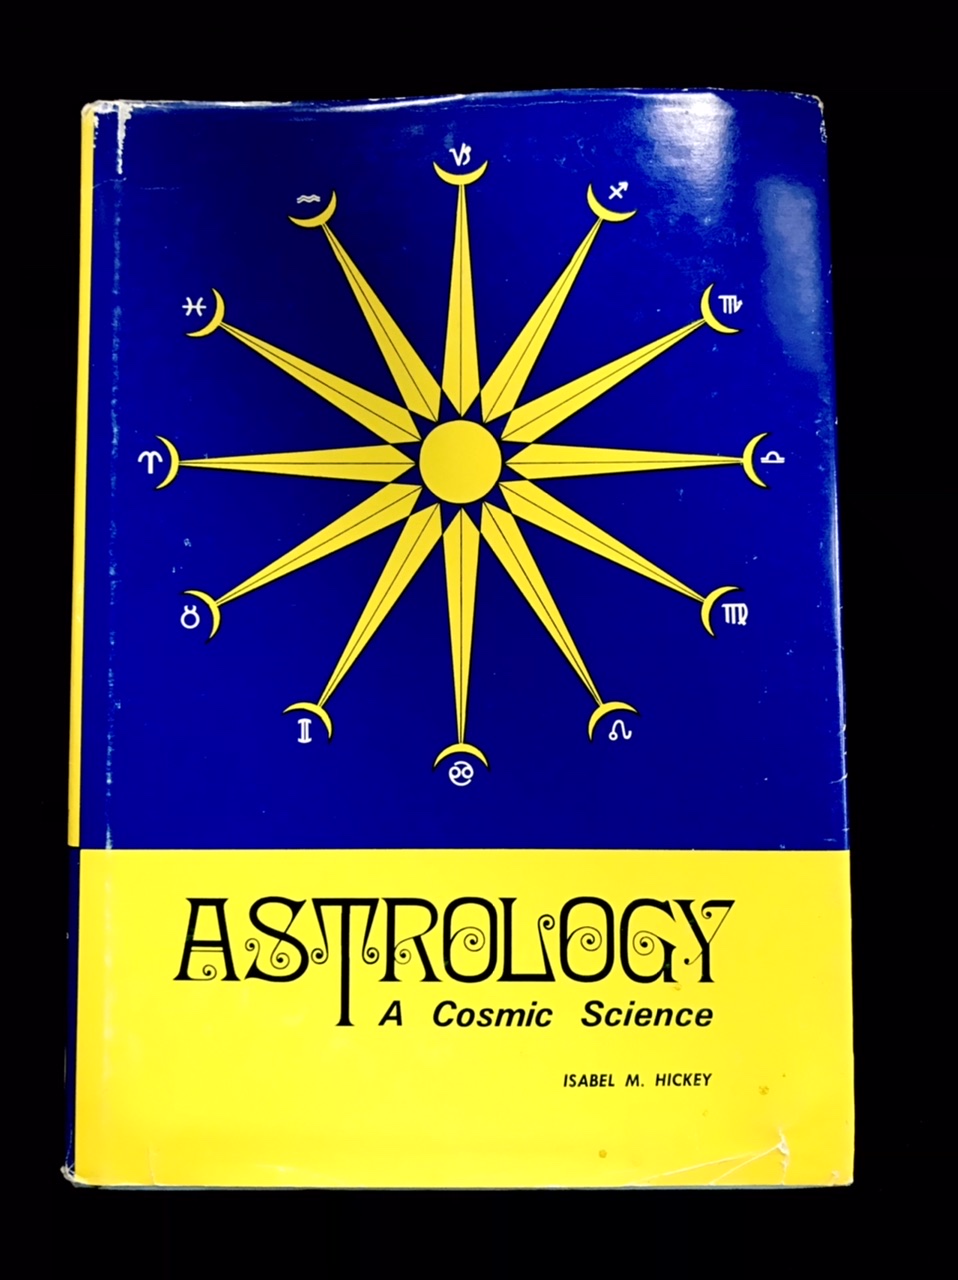 Astrology: A Cosmic Science by Isabel M. Hickey